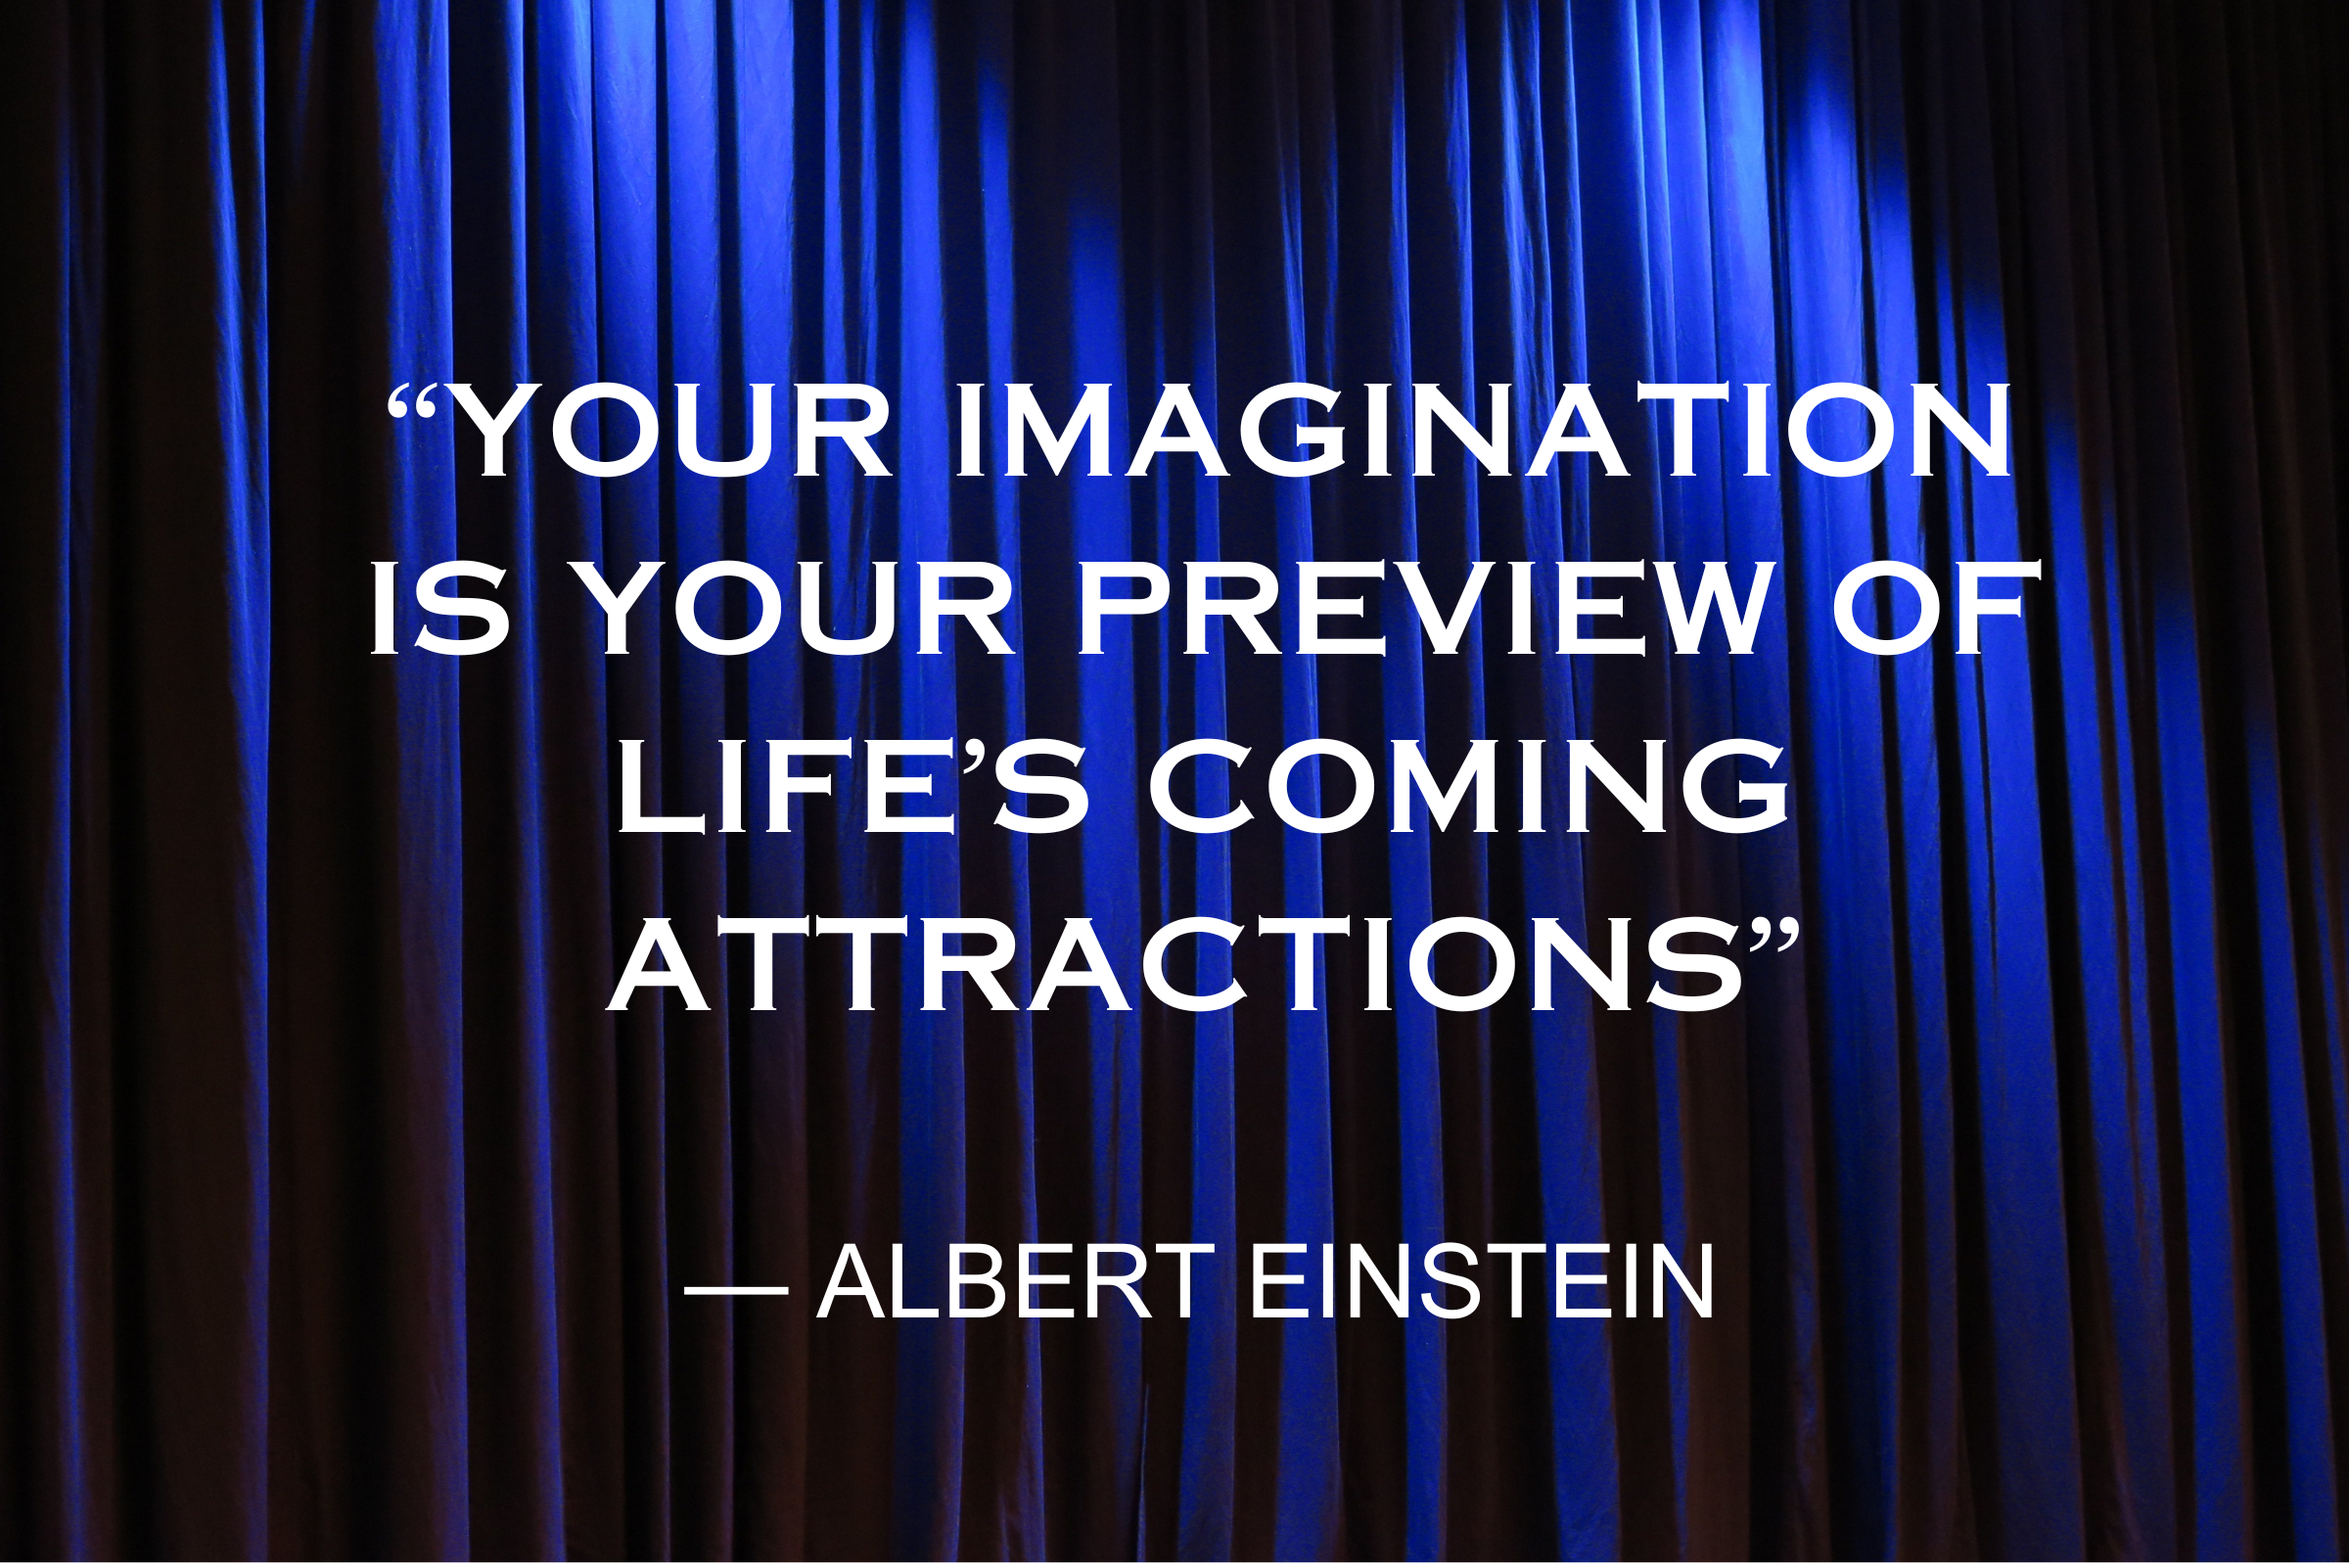 Your imagination is your preview of life’s coming attractions - Hope and Belief